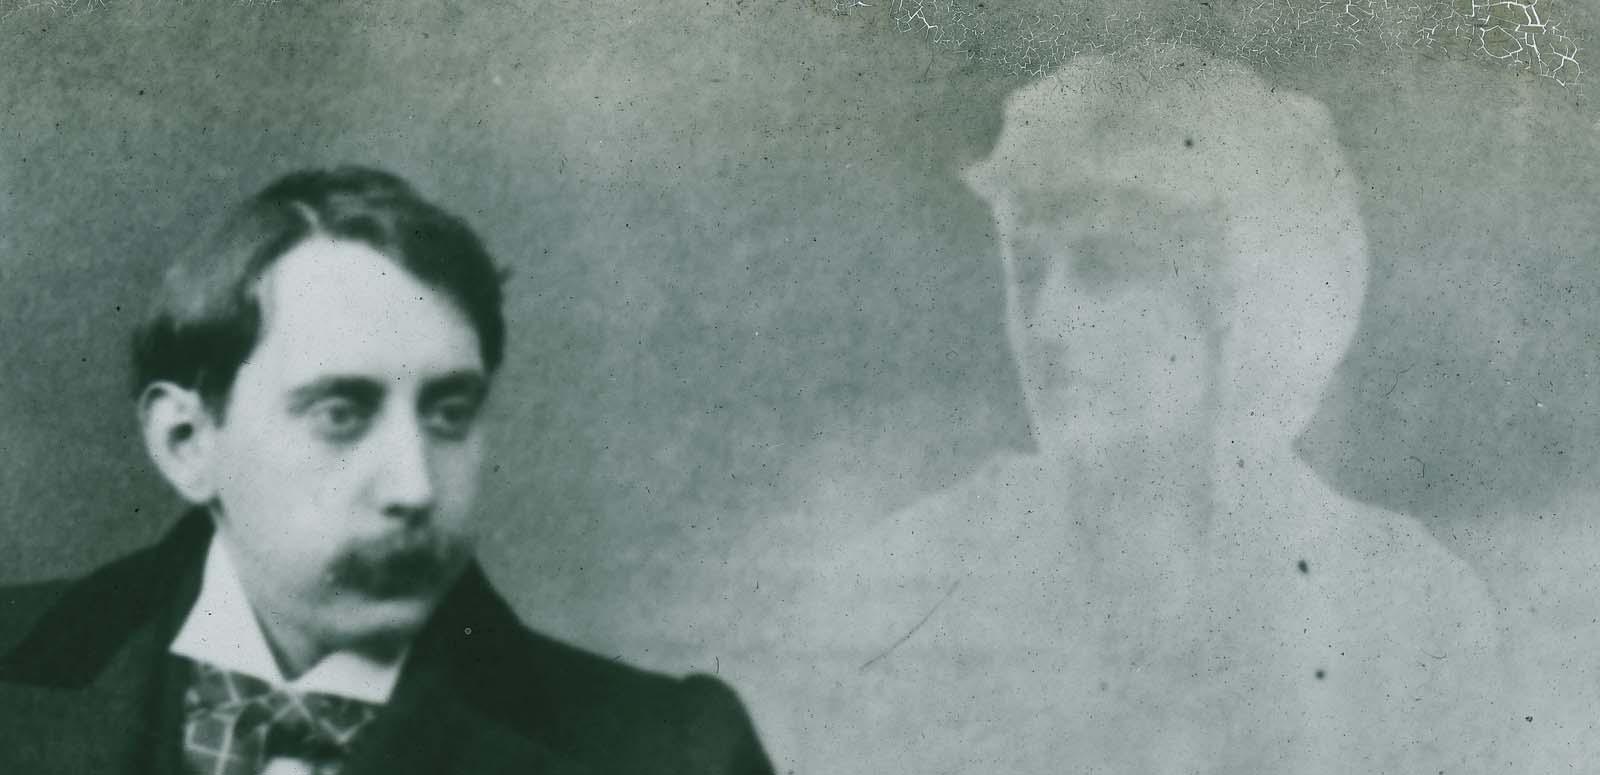 Details from a glass slide from 1870 purporting to show a young man with the spirit of a dead woman hovering at his shoulder